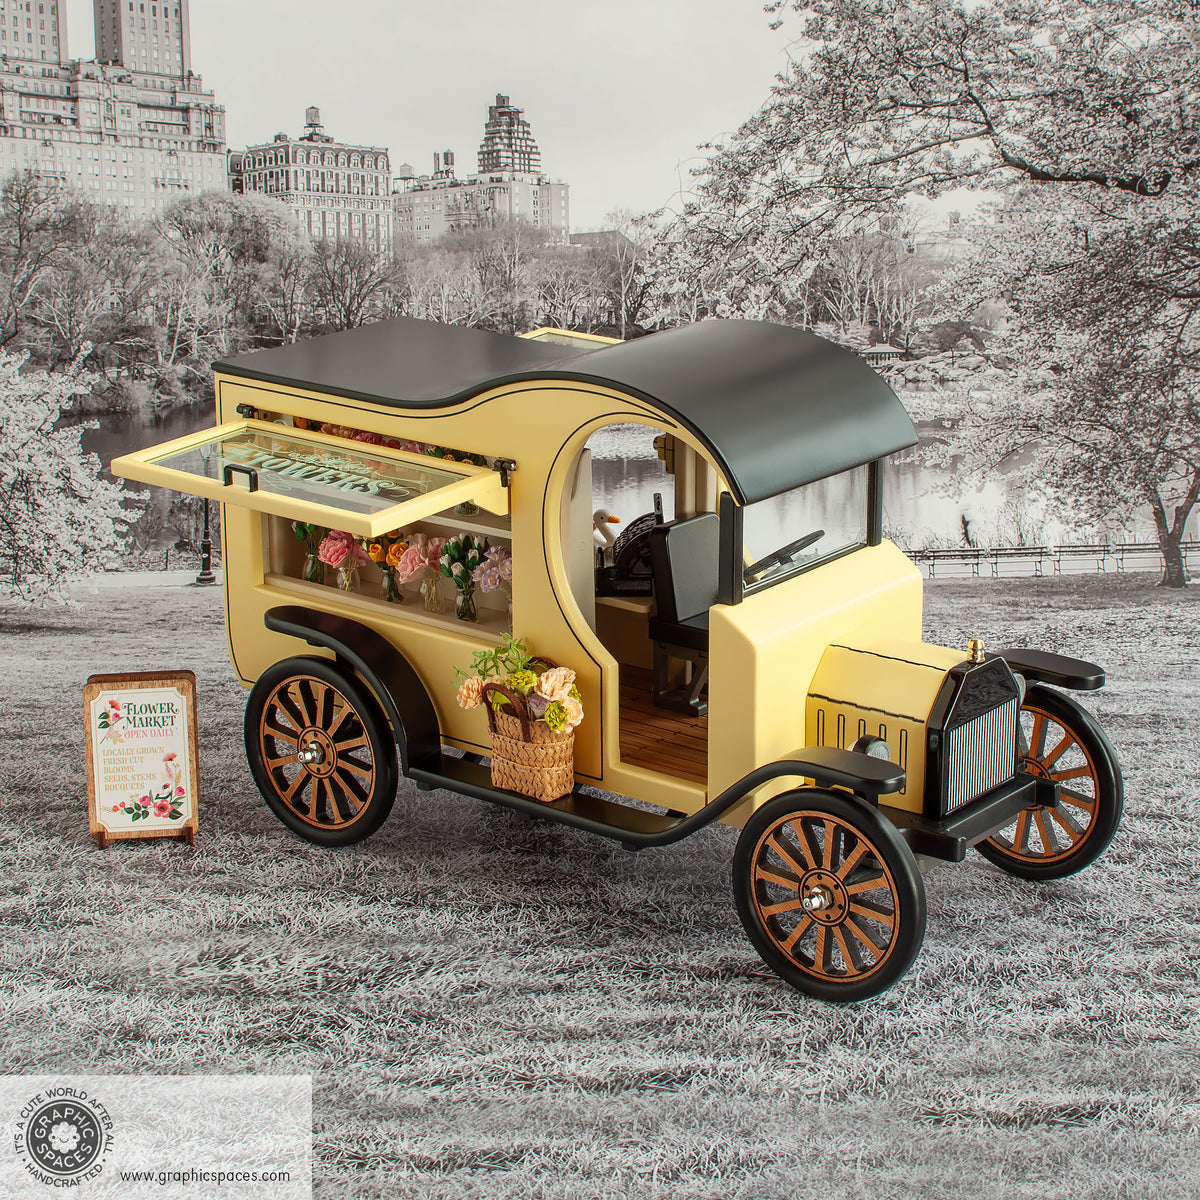 1:12 Scale Room Box Yellow Flower Shop Truck Model-T C-Cab. Passenger side view. Open window displaying flowers.